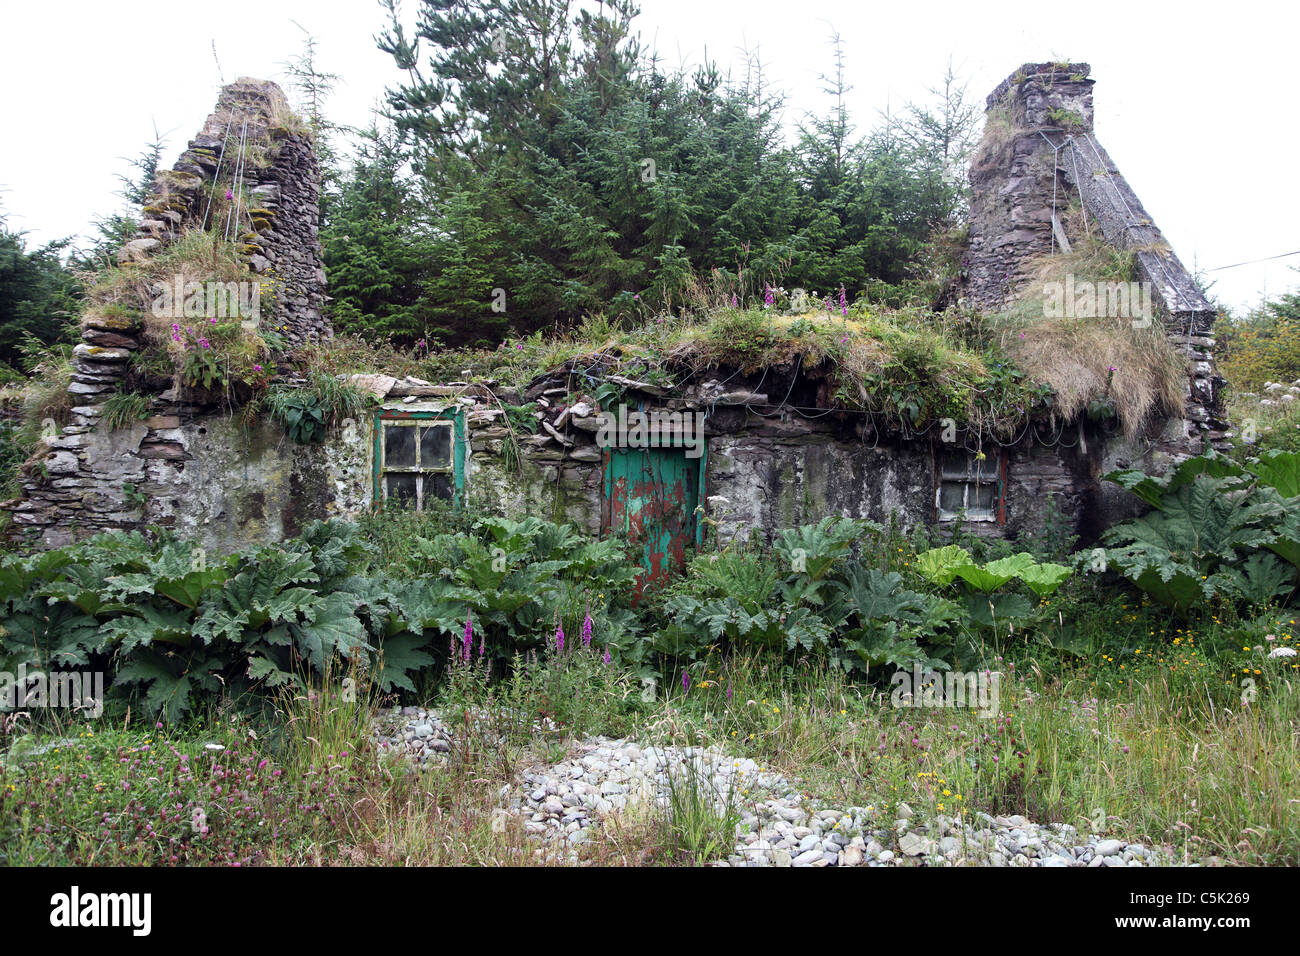 Ruined cottage Cill Rialaig, Ballinskelligs, Co. Kerry, Ireland Stock Photo